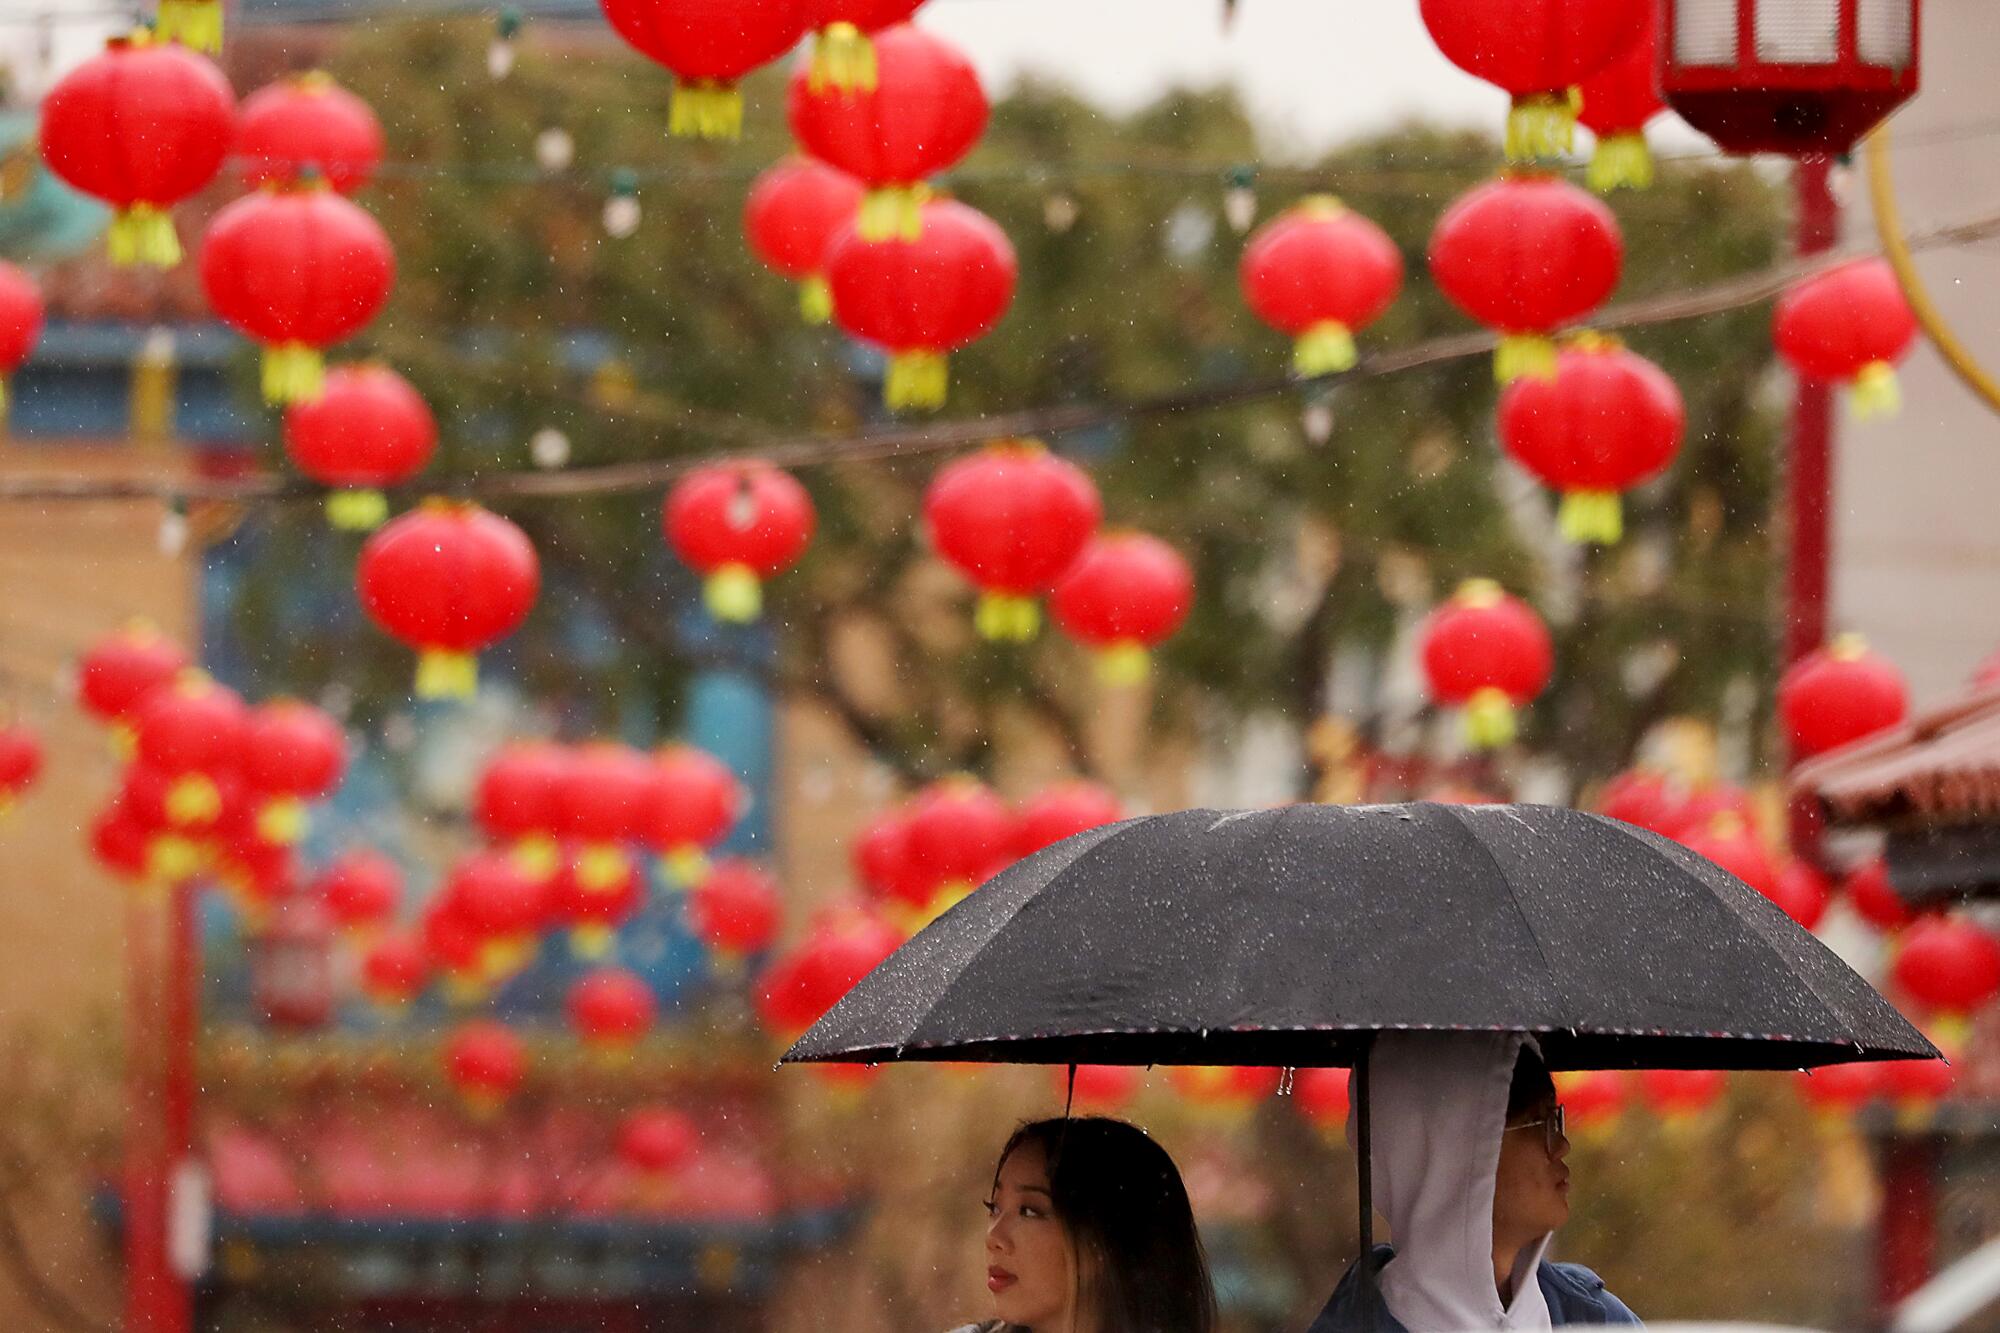 Dozens of red, round Chinese lecterns hang over a plaza near two people under an umbrella.